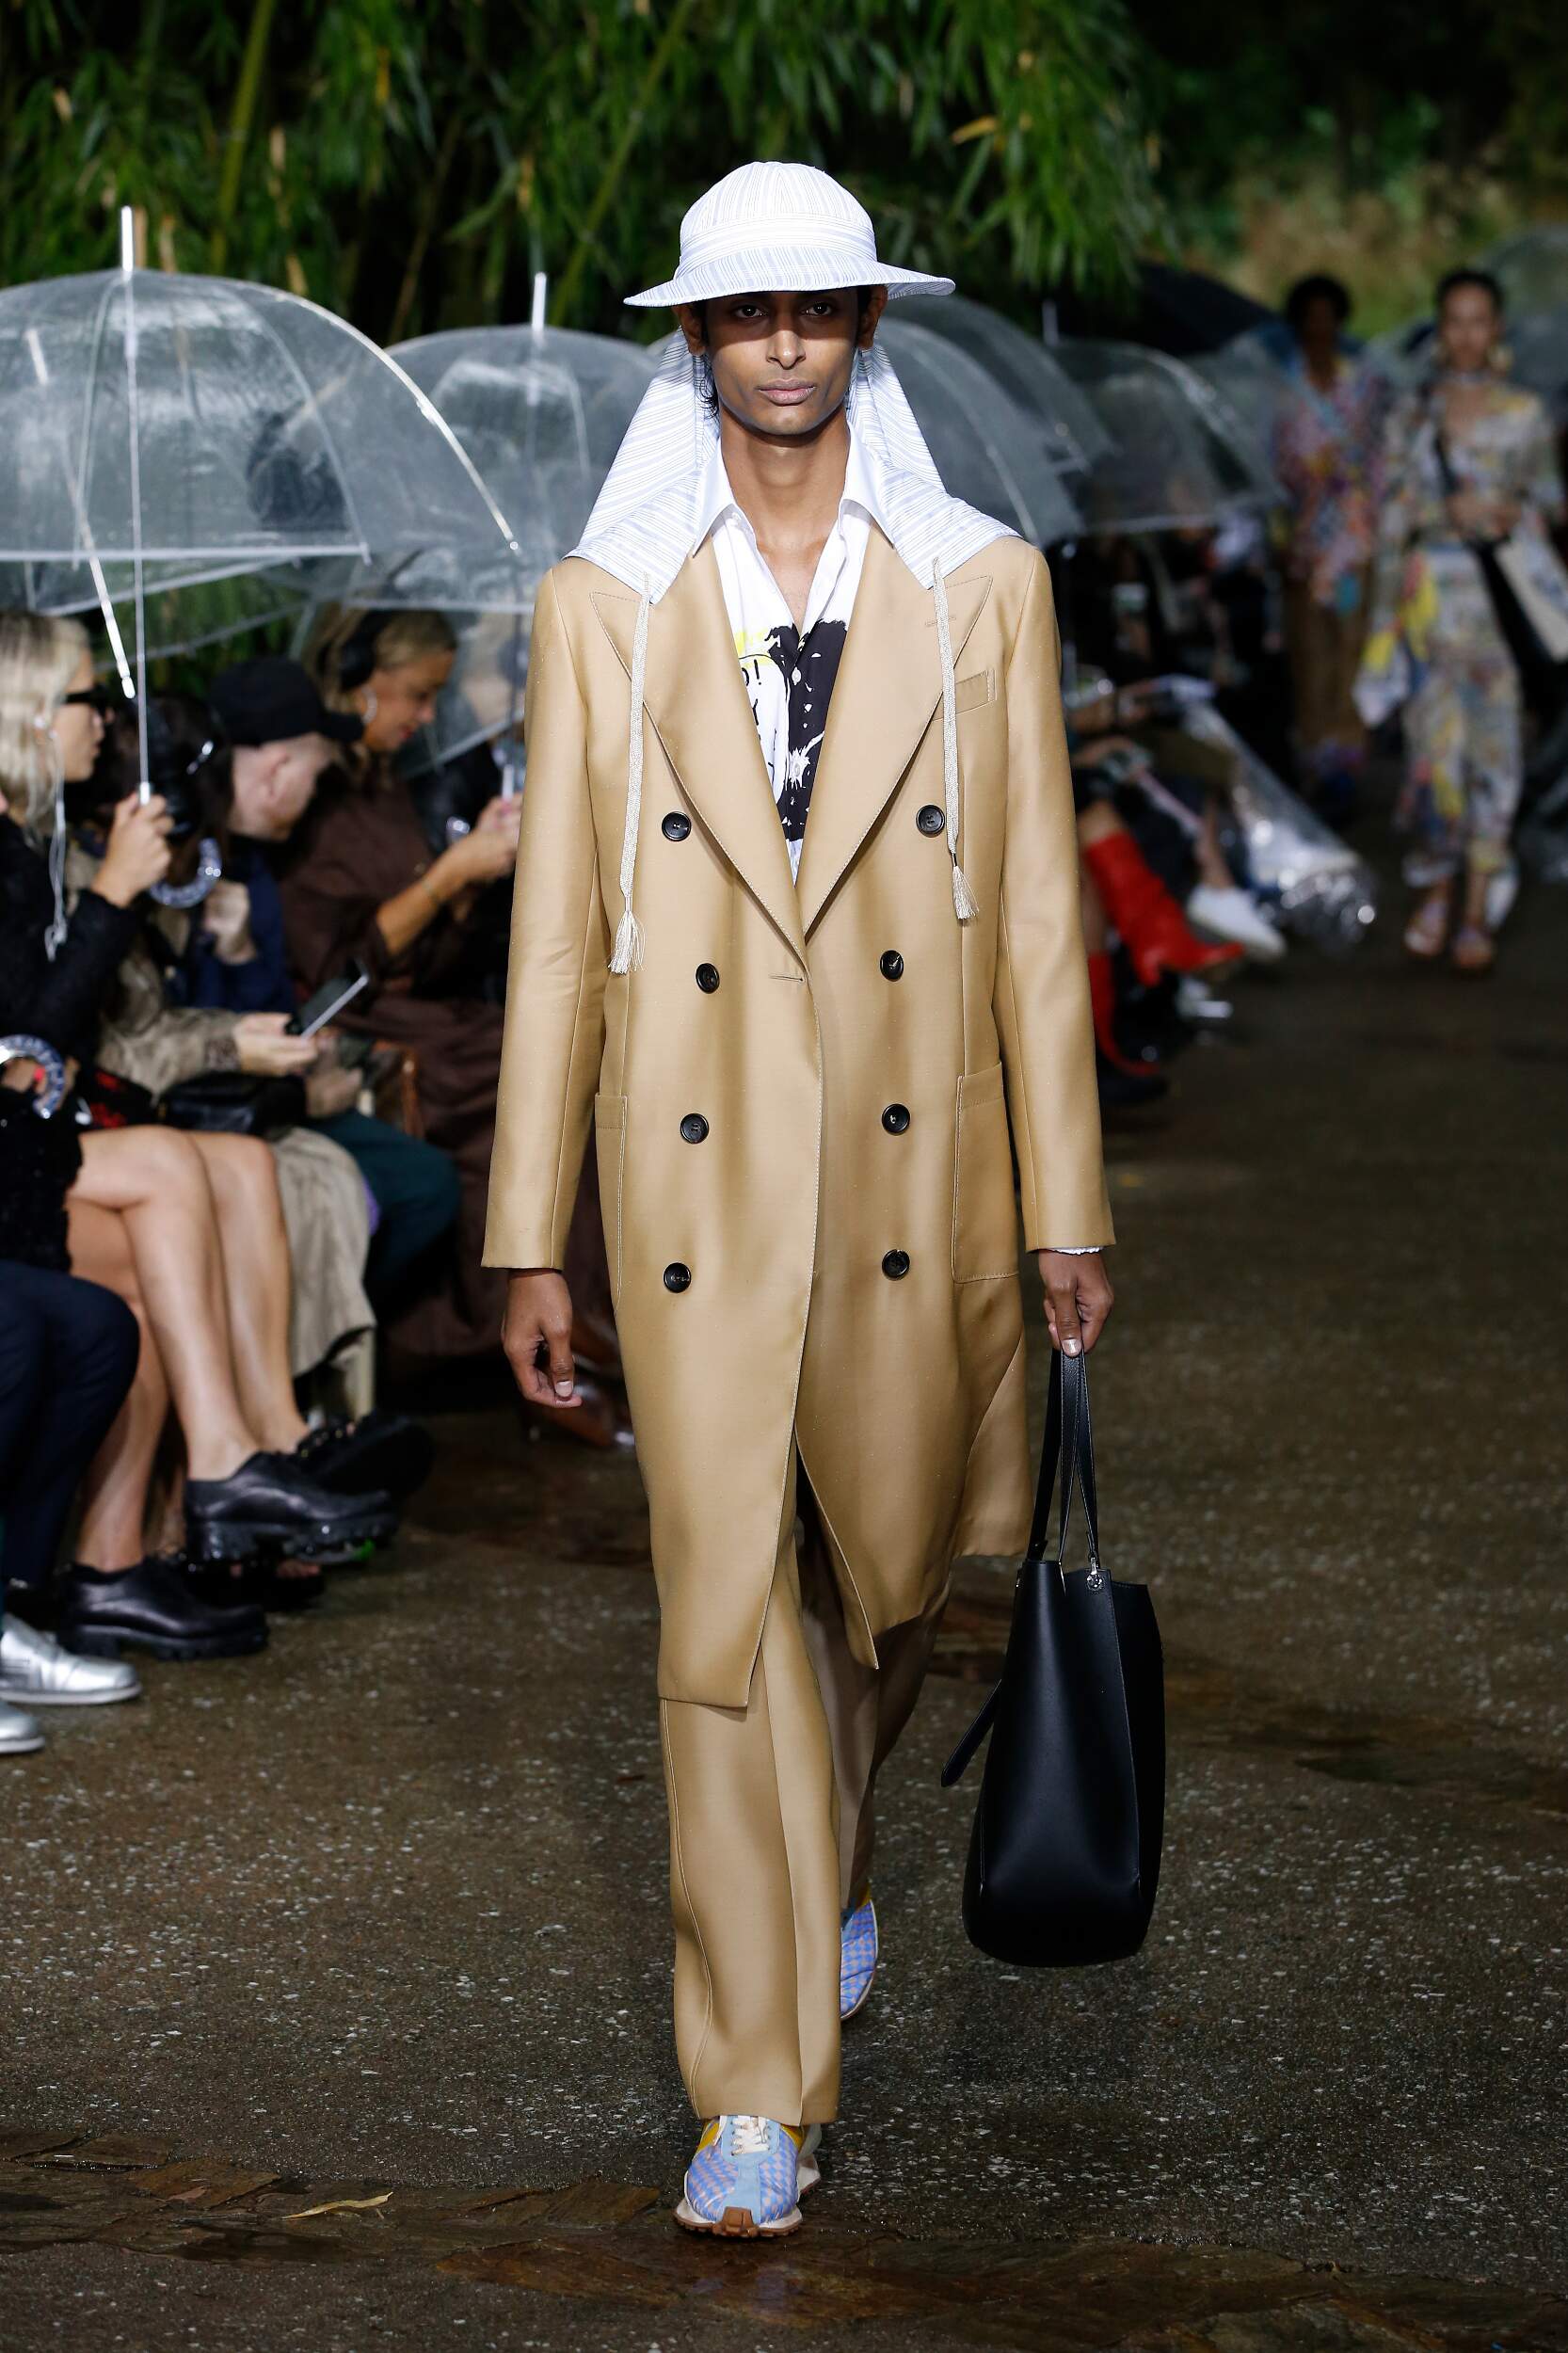 LANVIN SPRING SUMMER 2020 COLLECTION | The Skinny Beep